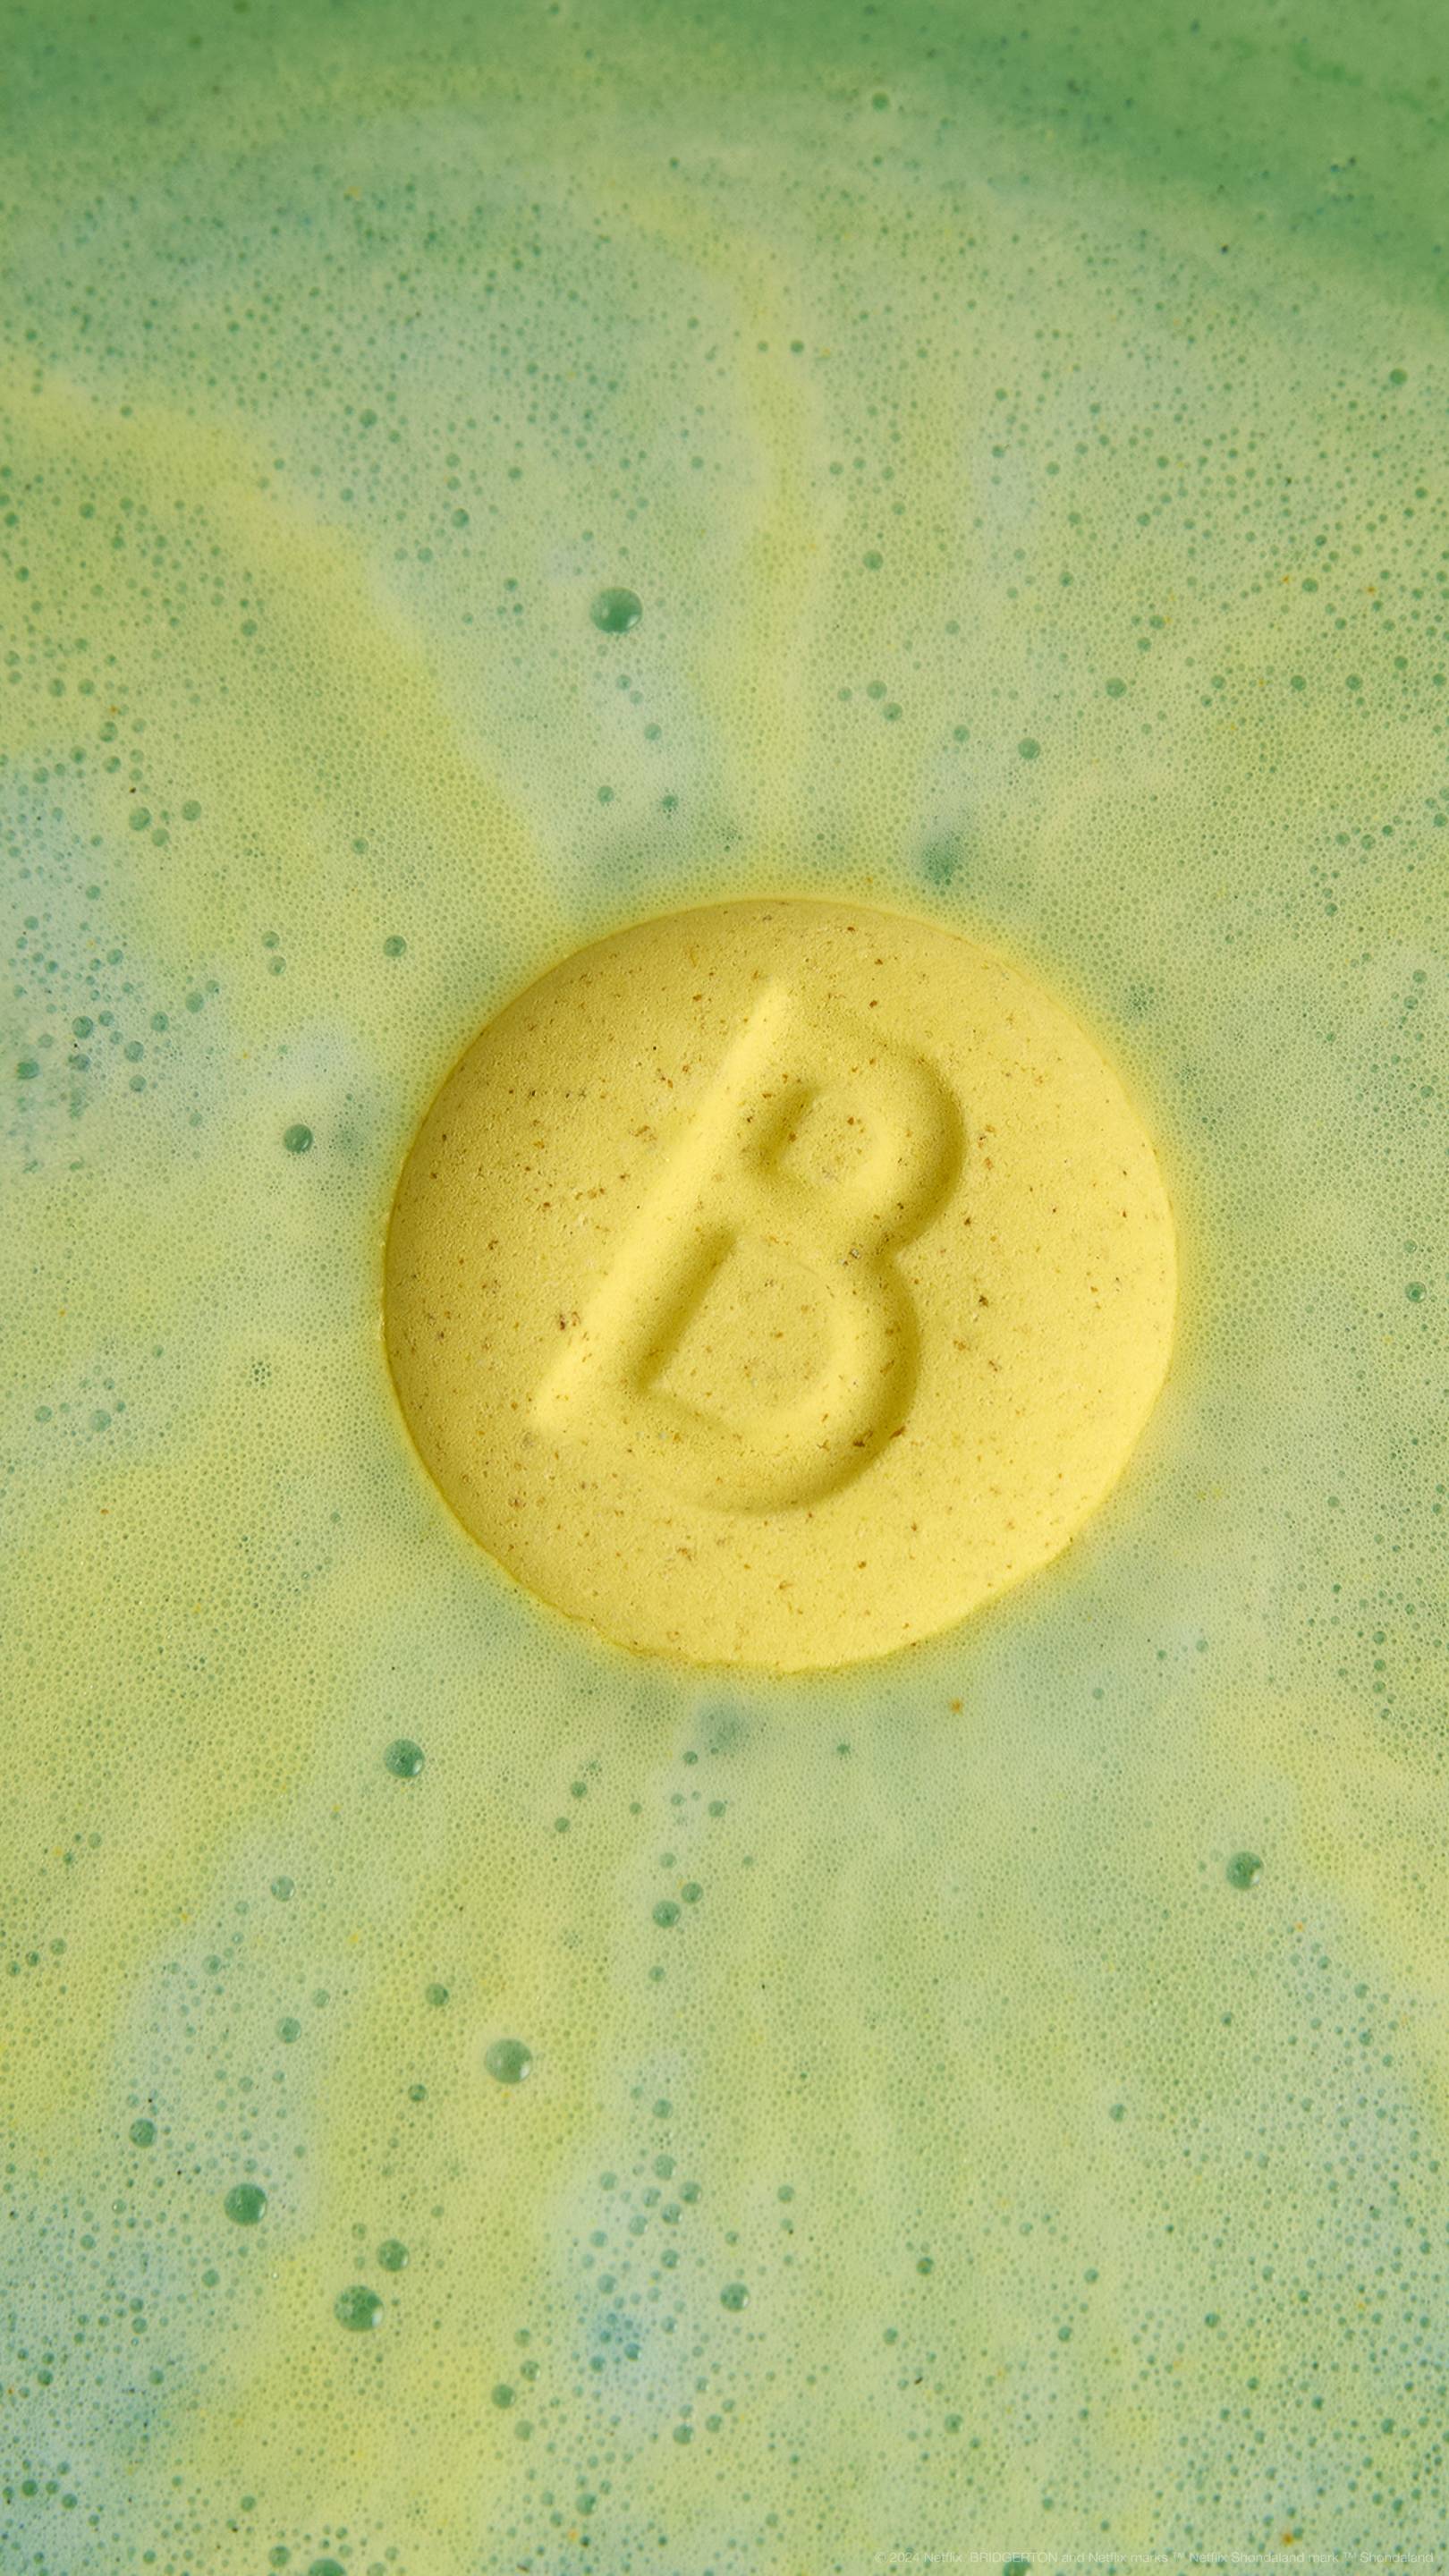 The image shows the Two Families bath bomb on the surface of the water with the yellow side with an embossed letter "B" facing up. Fresh green water lies beneath a layer of velvety foam.